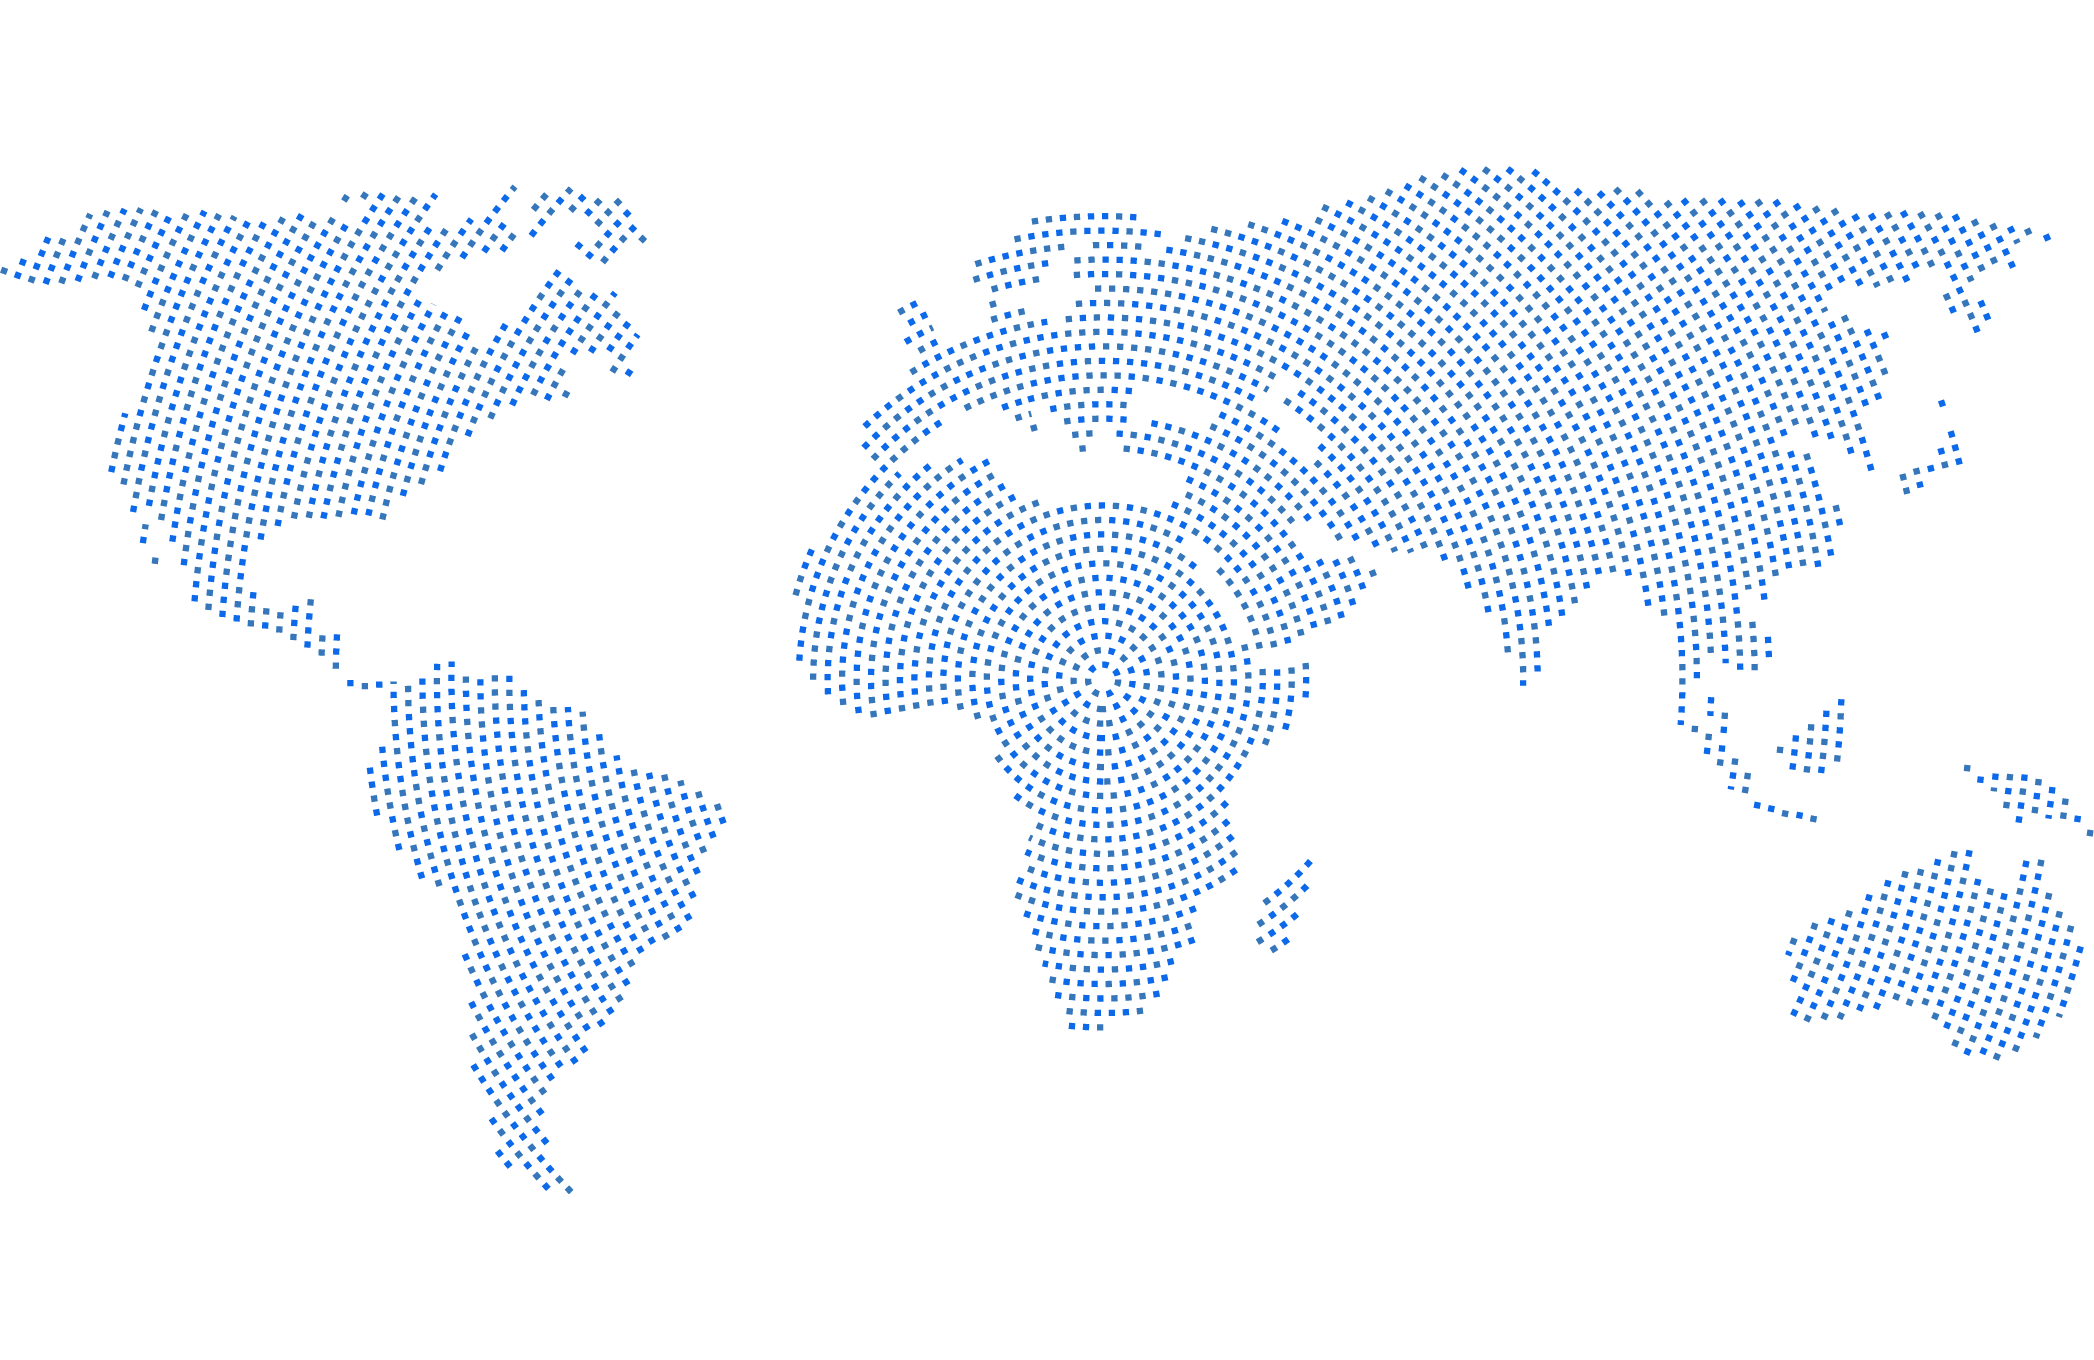 Frontline Managed Services Map Continents Dark Blue